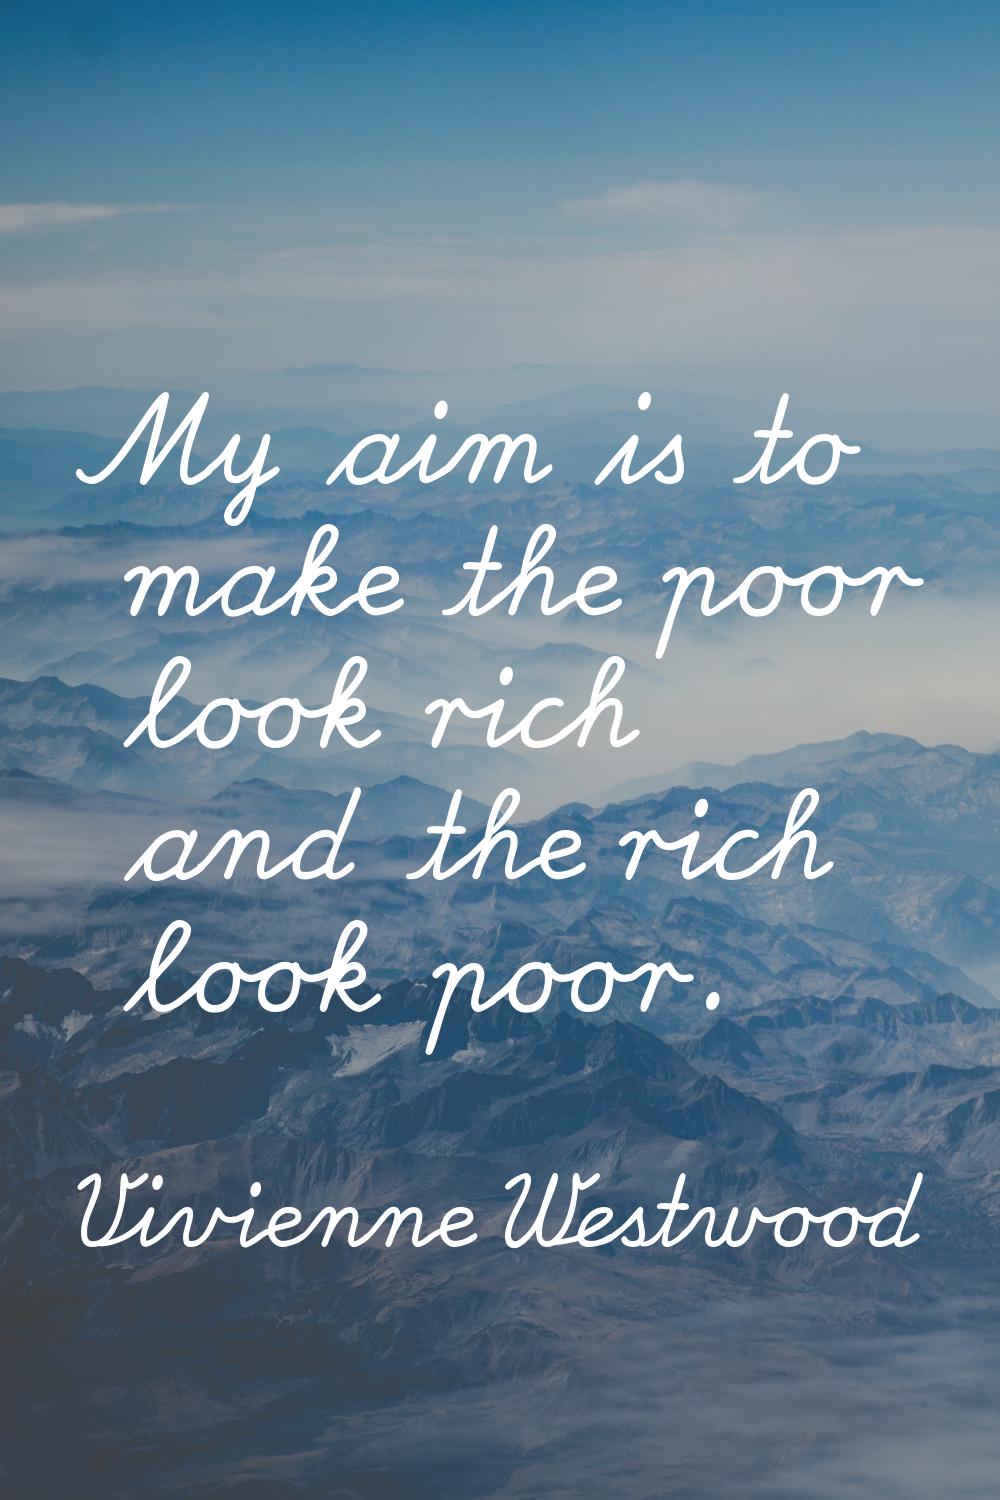 My aim is to make the poor look rich and the rich look poor.